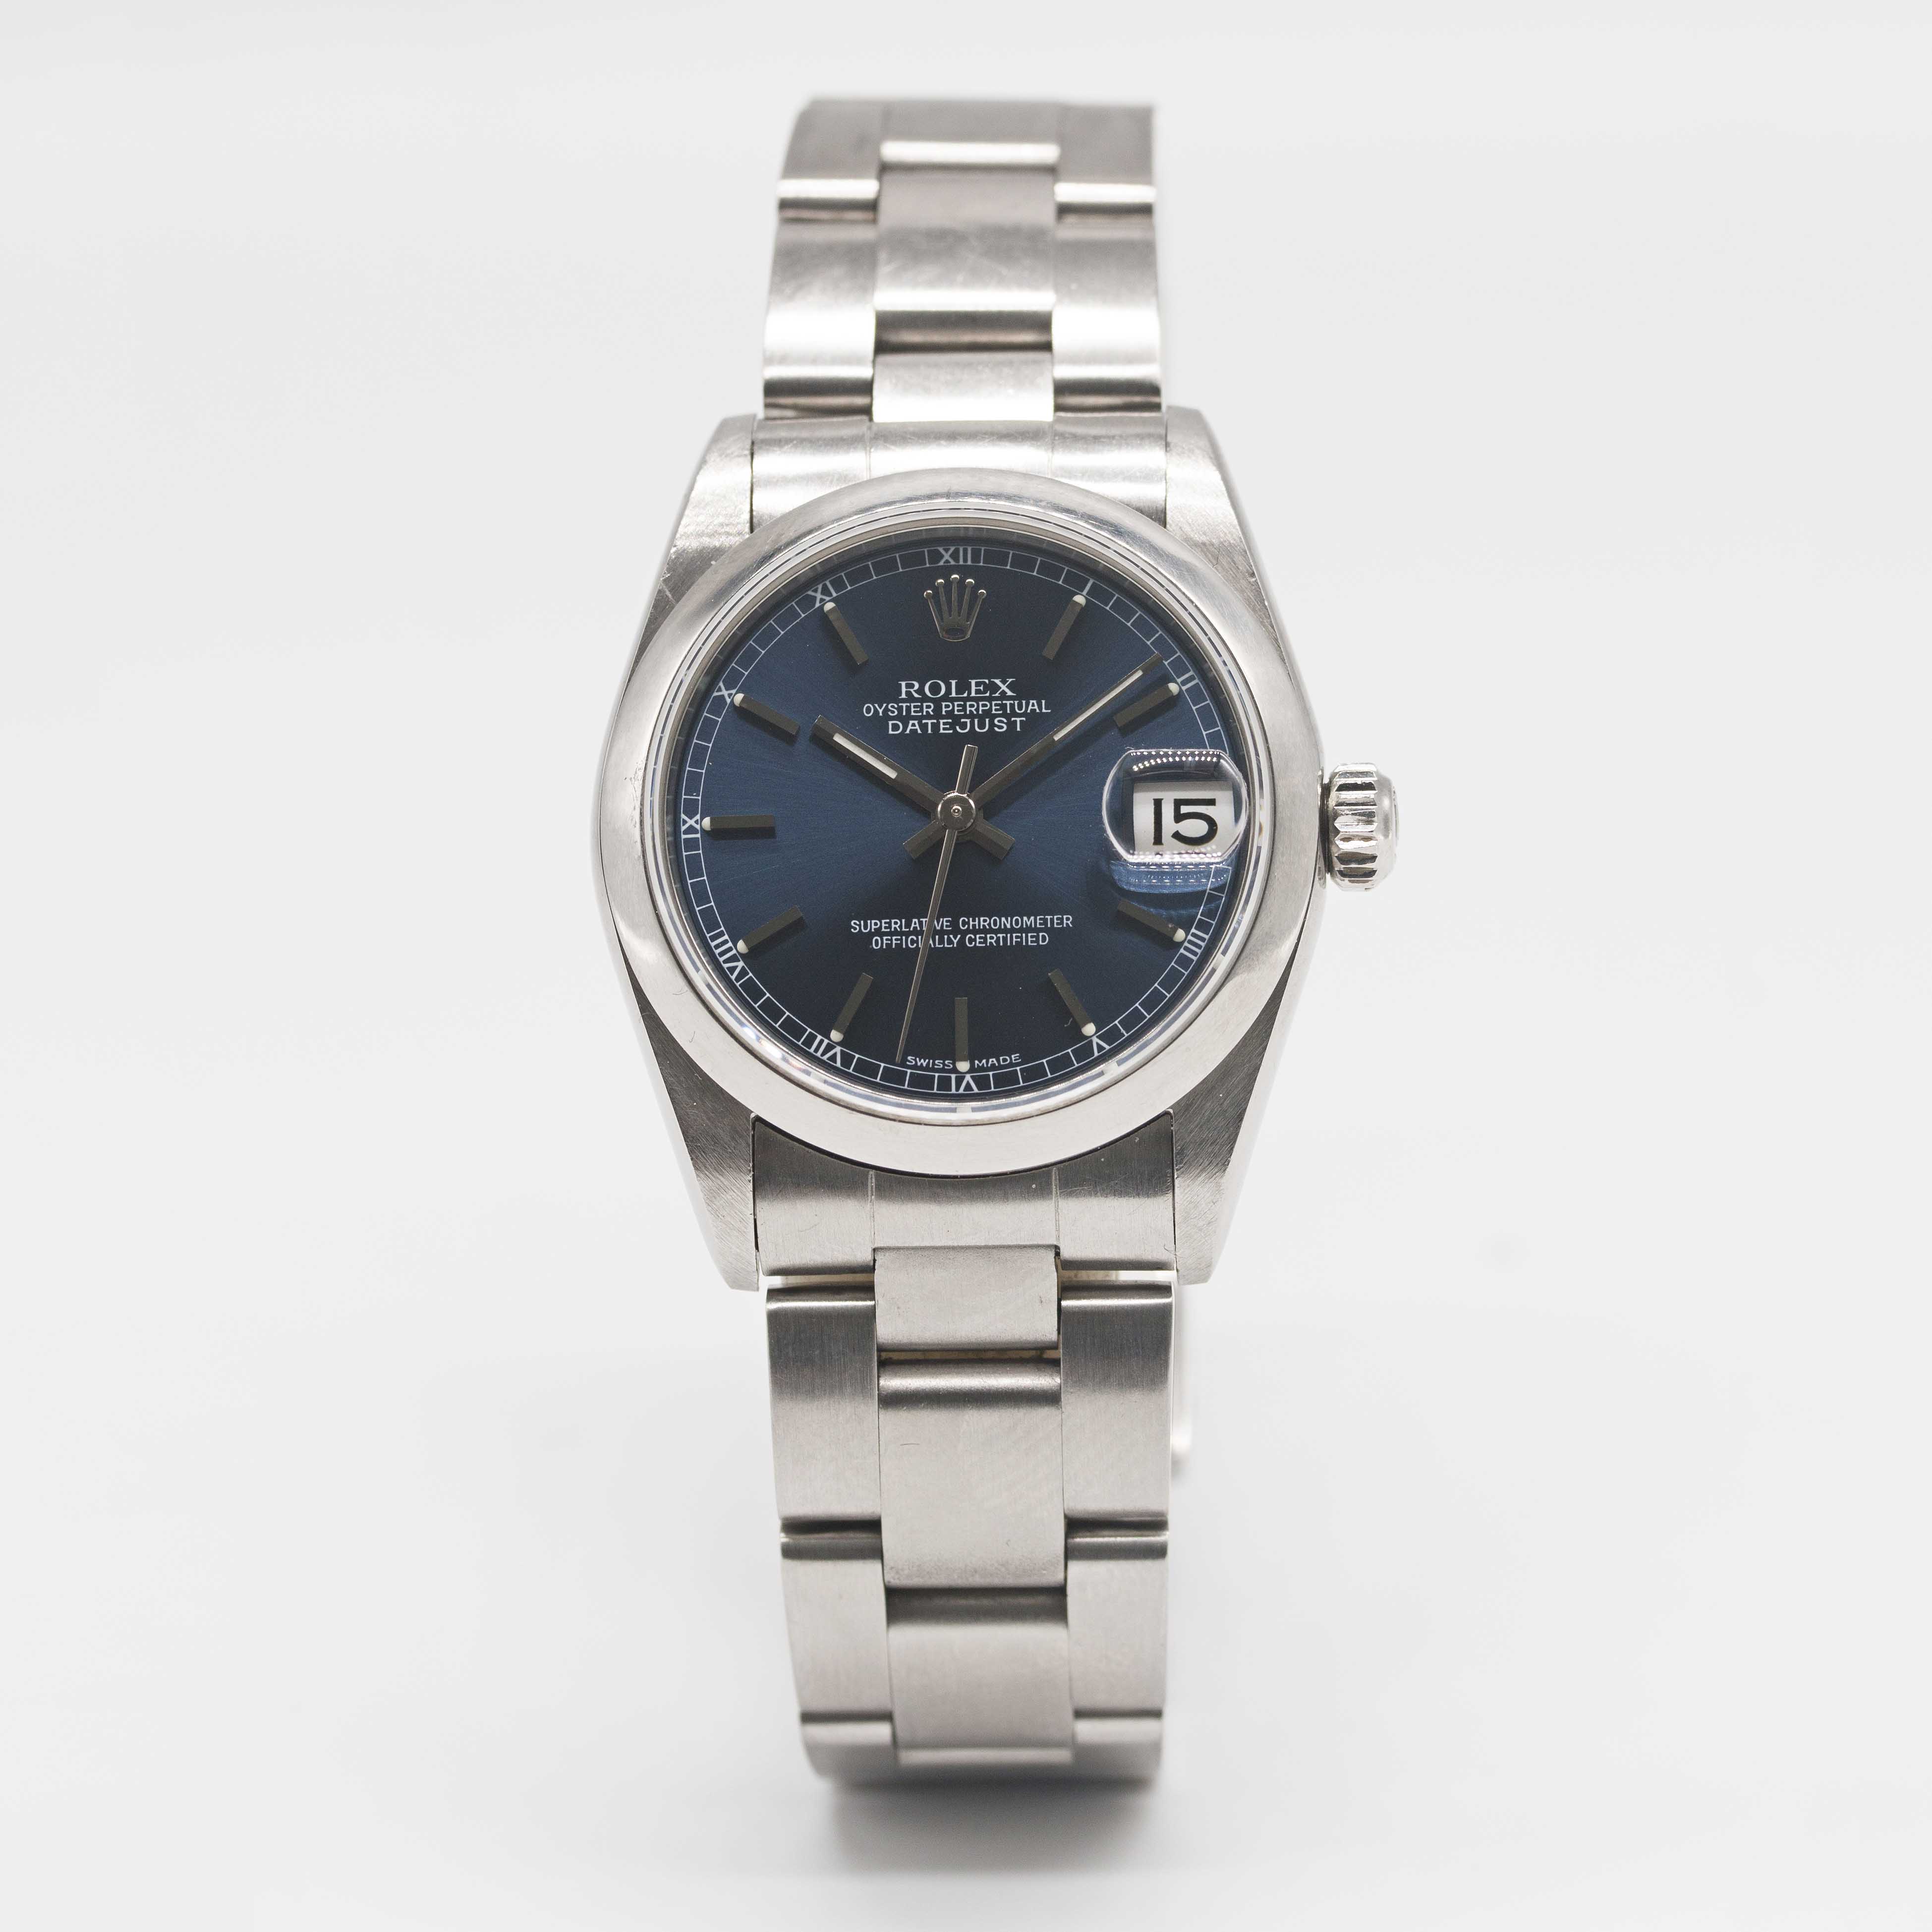 A MID SIZE STAINLESS STEEL ROLEX OYSTER PERPETUAL DATEJUST BRACELET WATCH CIRCA 2001, REF. 78240 - Image 2 of 9